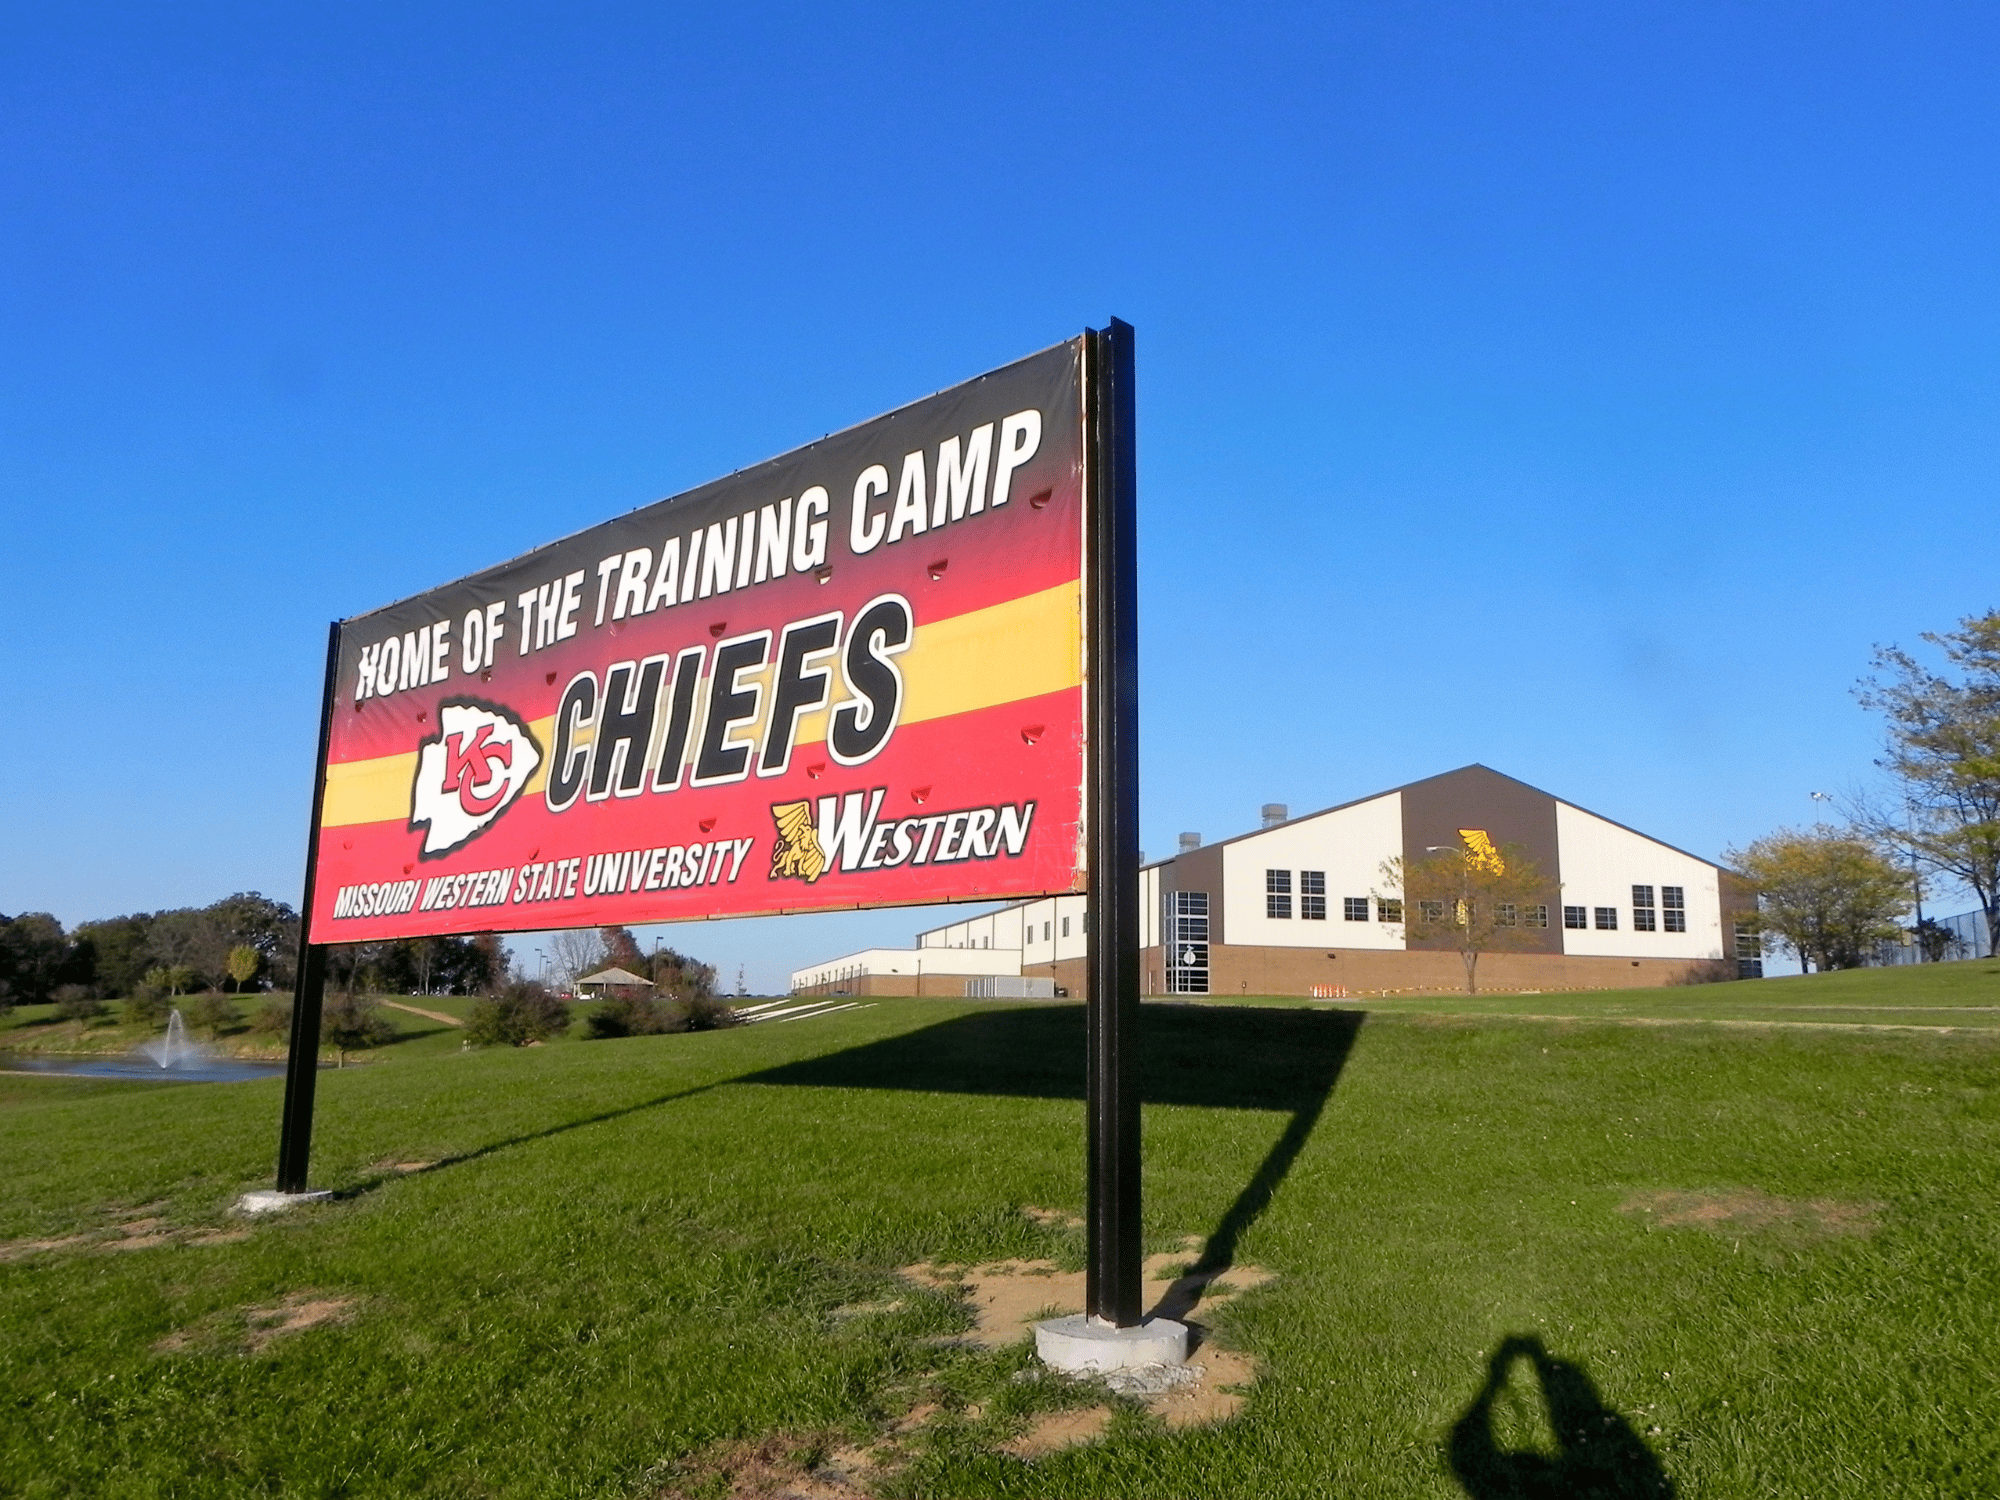 Sign in front of building that says Home of the Training Camp for the Kansas City Chiefs